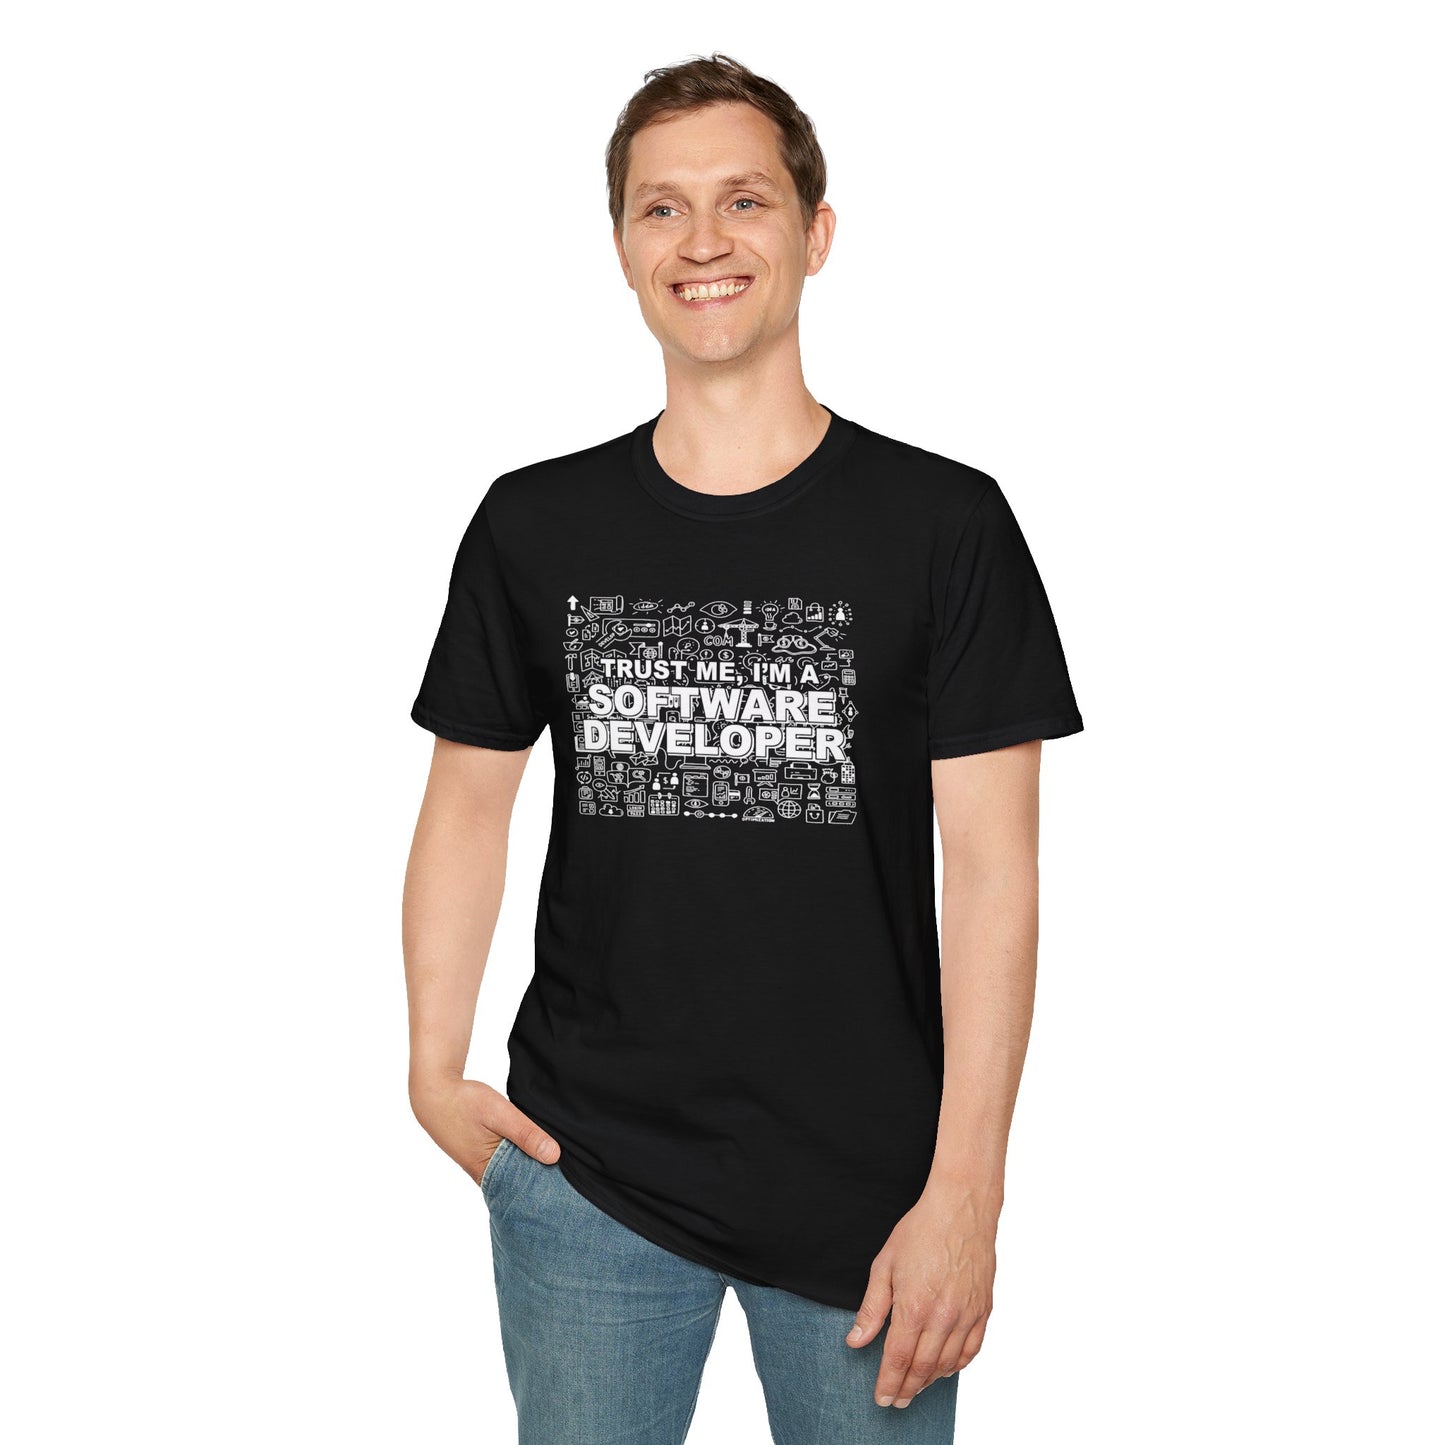 Trust Me, I'm a Software Developer T-Shirt - Elevate Your Style with Coding Confidence!